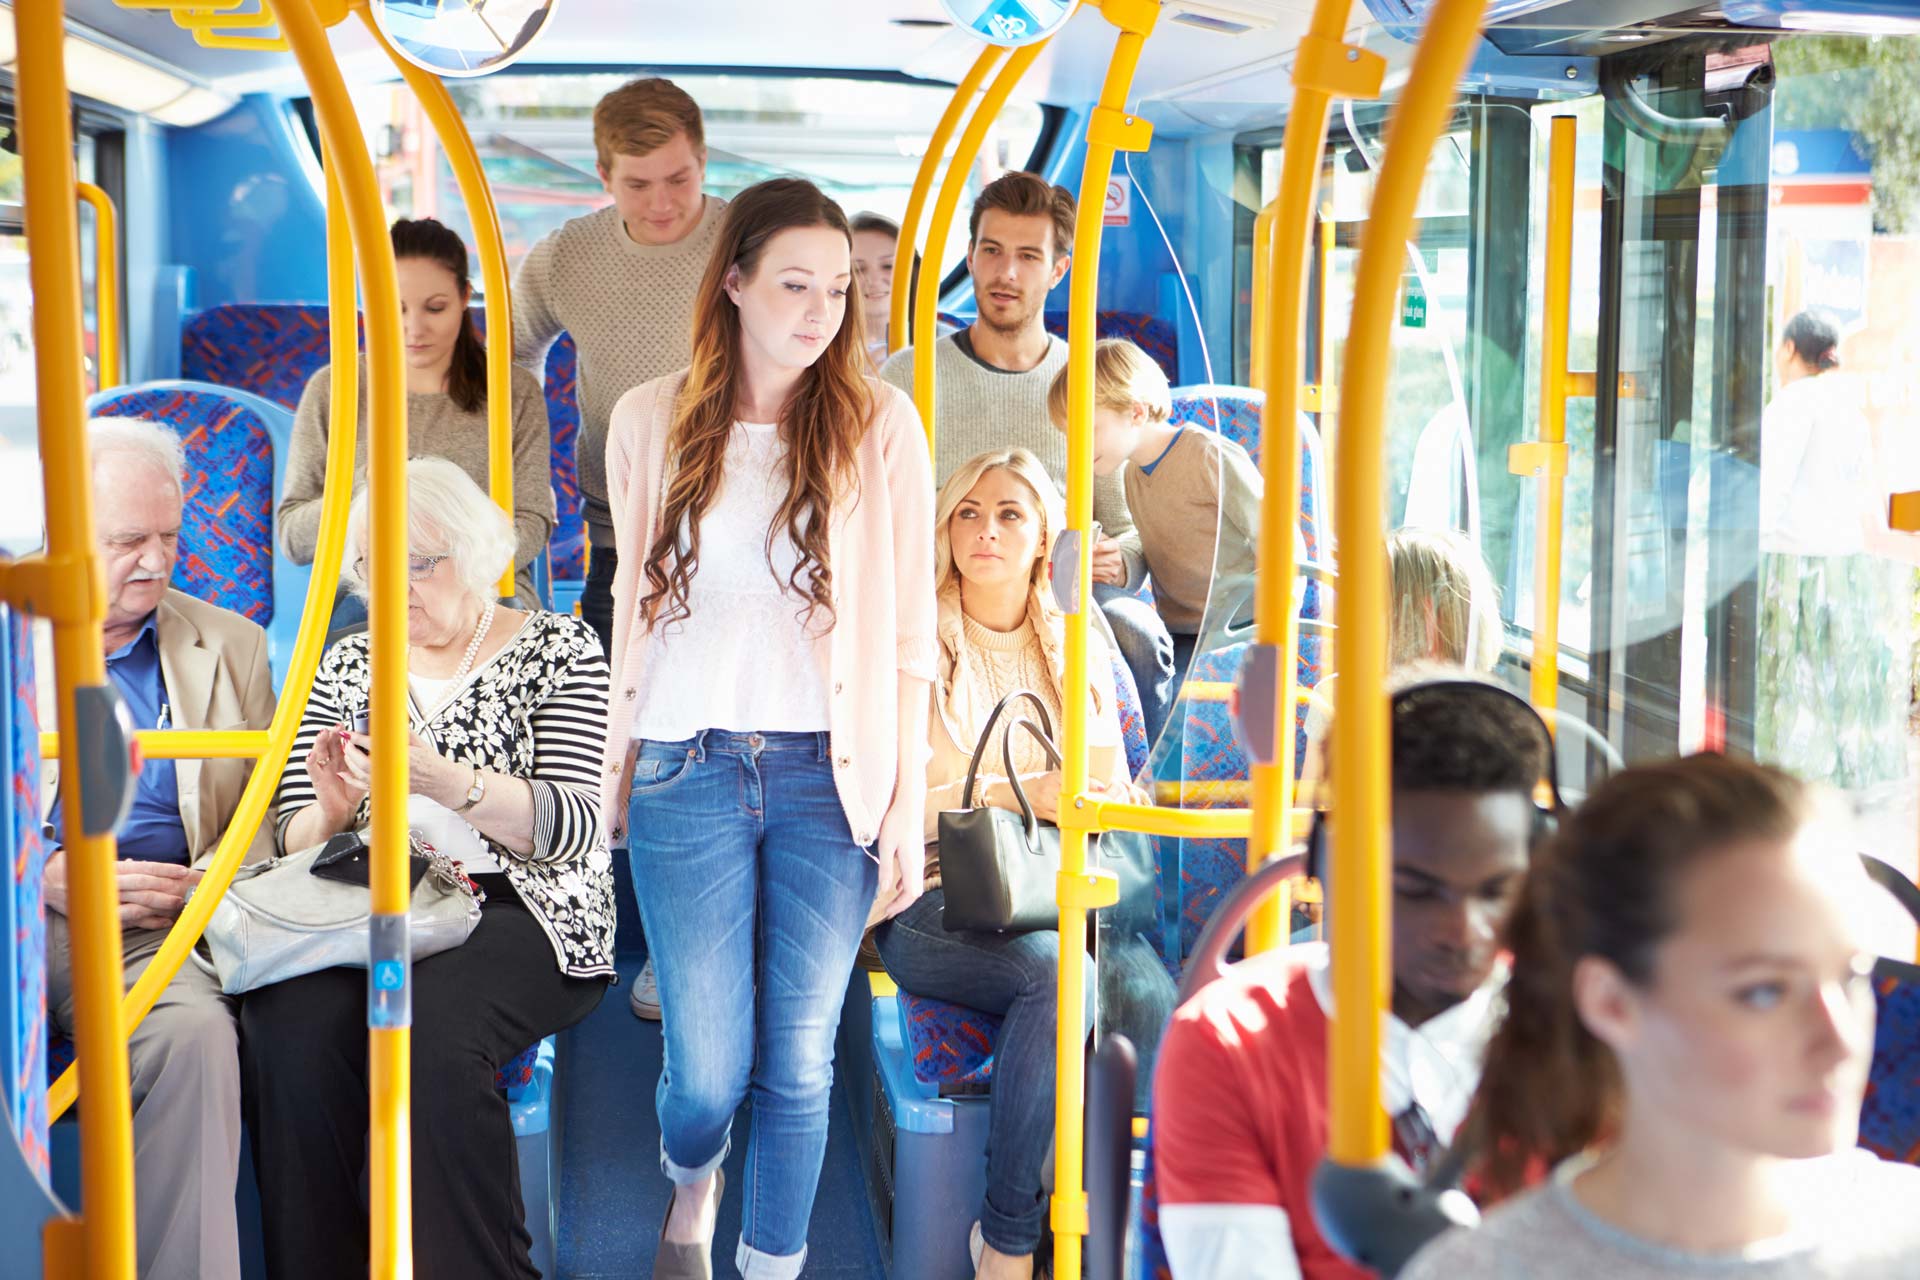 SGESCO-MAX has proven safety solutions for new NSW Bus Requirements for door safety systems so people are safer around opening and closing bus doors